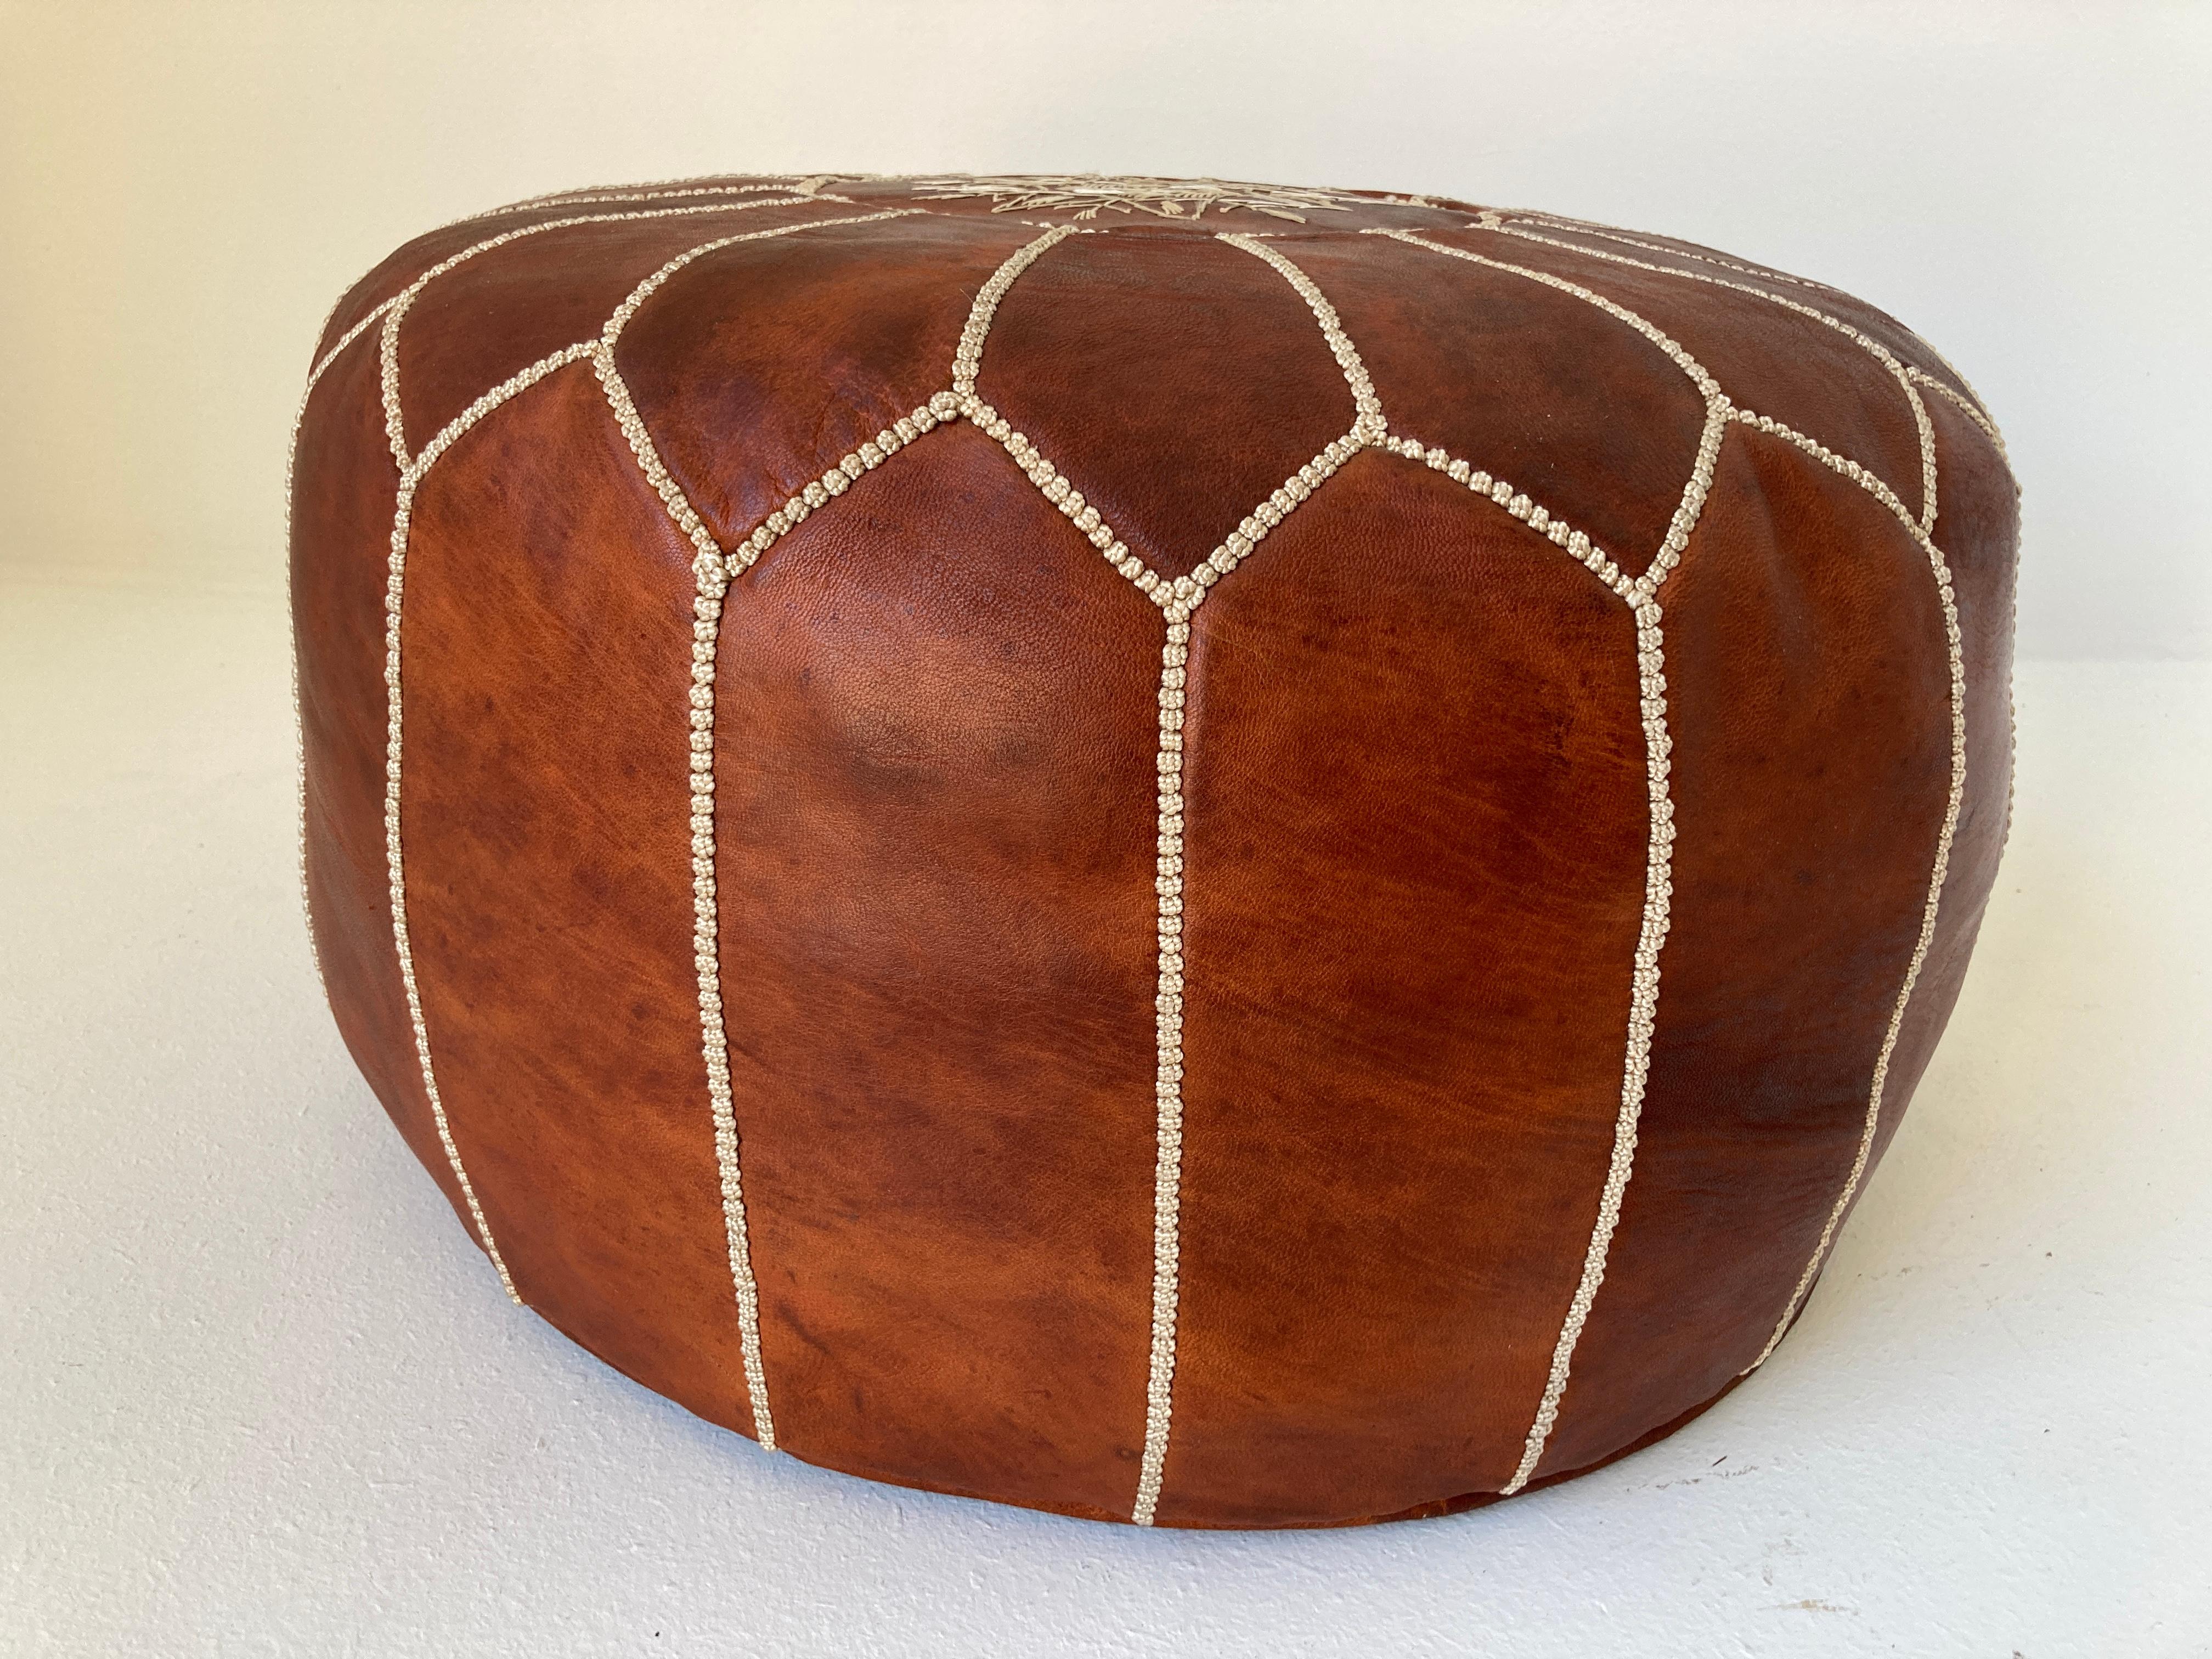 Moroccan handcrafted brown camel leather ottoman, with embroideries.
Cod be used a foot sto, or side table or ottoman.
The Moroccan leather poufs are hand-toed and embroidered with white tread.
Very nice handmade vintage Moroccan tan camel cor